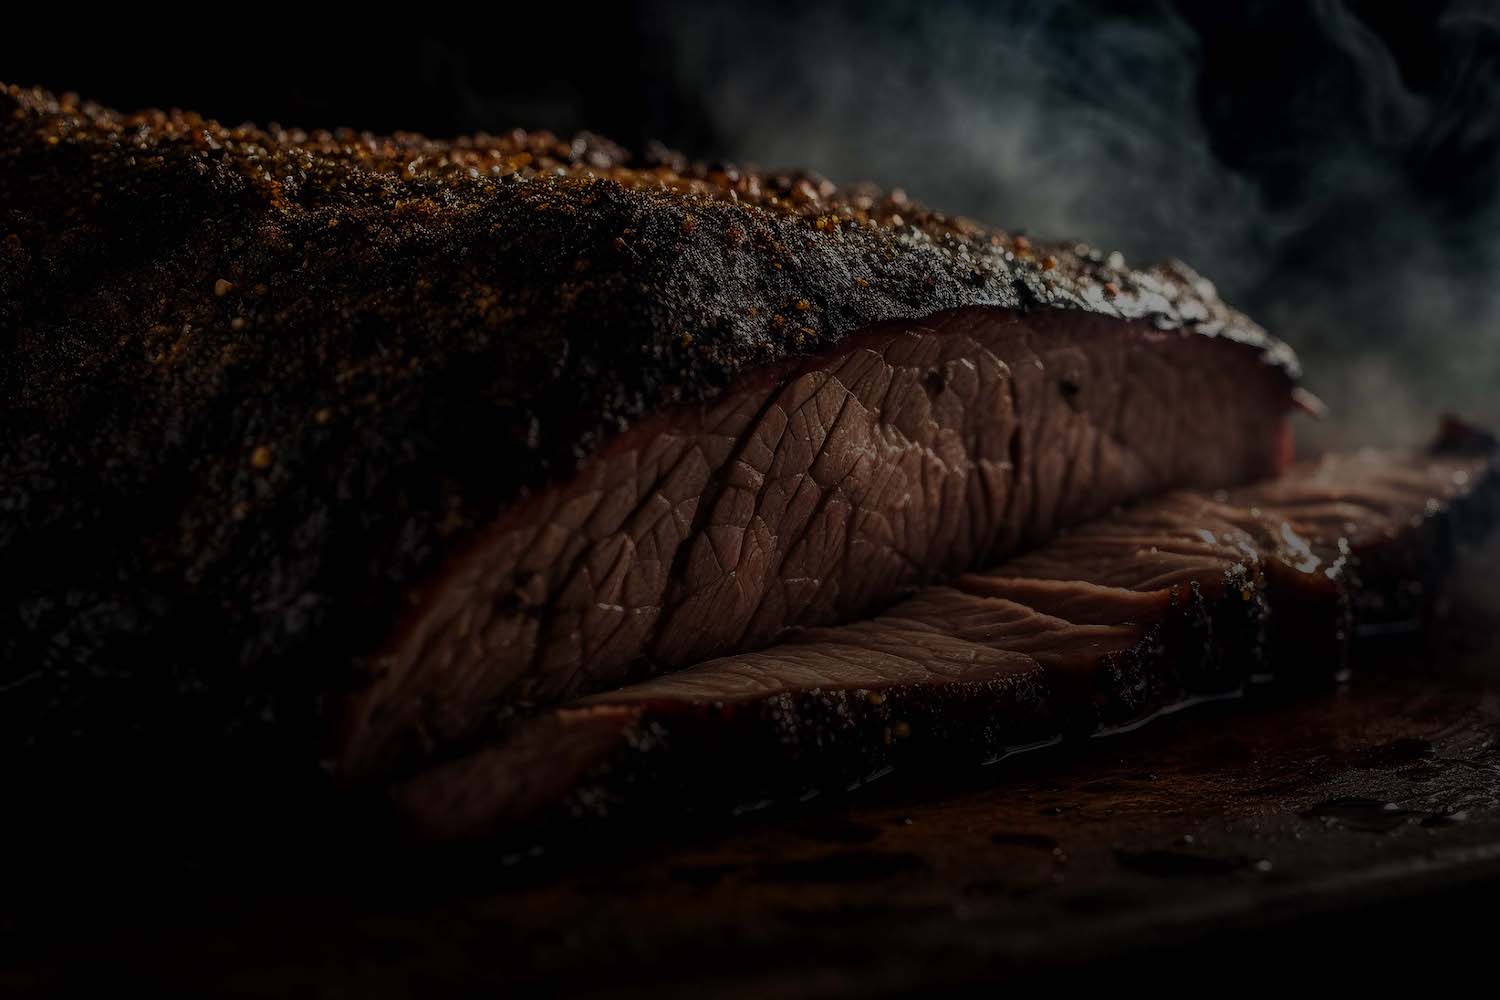 A close-up shot of a smoked beef brisket on a wooden board, with two thick slices partially cut. The brisket has a dark, seasoned crust and juicy, tender meat inside. Steam rises in the background, highlighting its freshly cooked state.